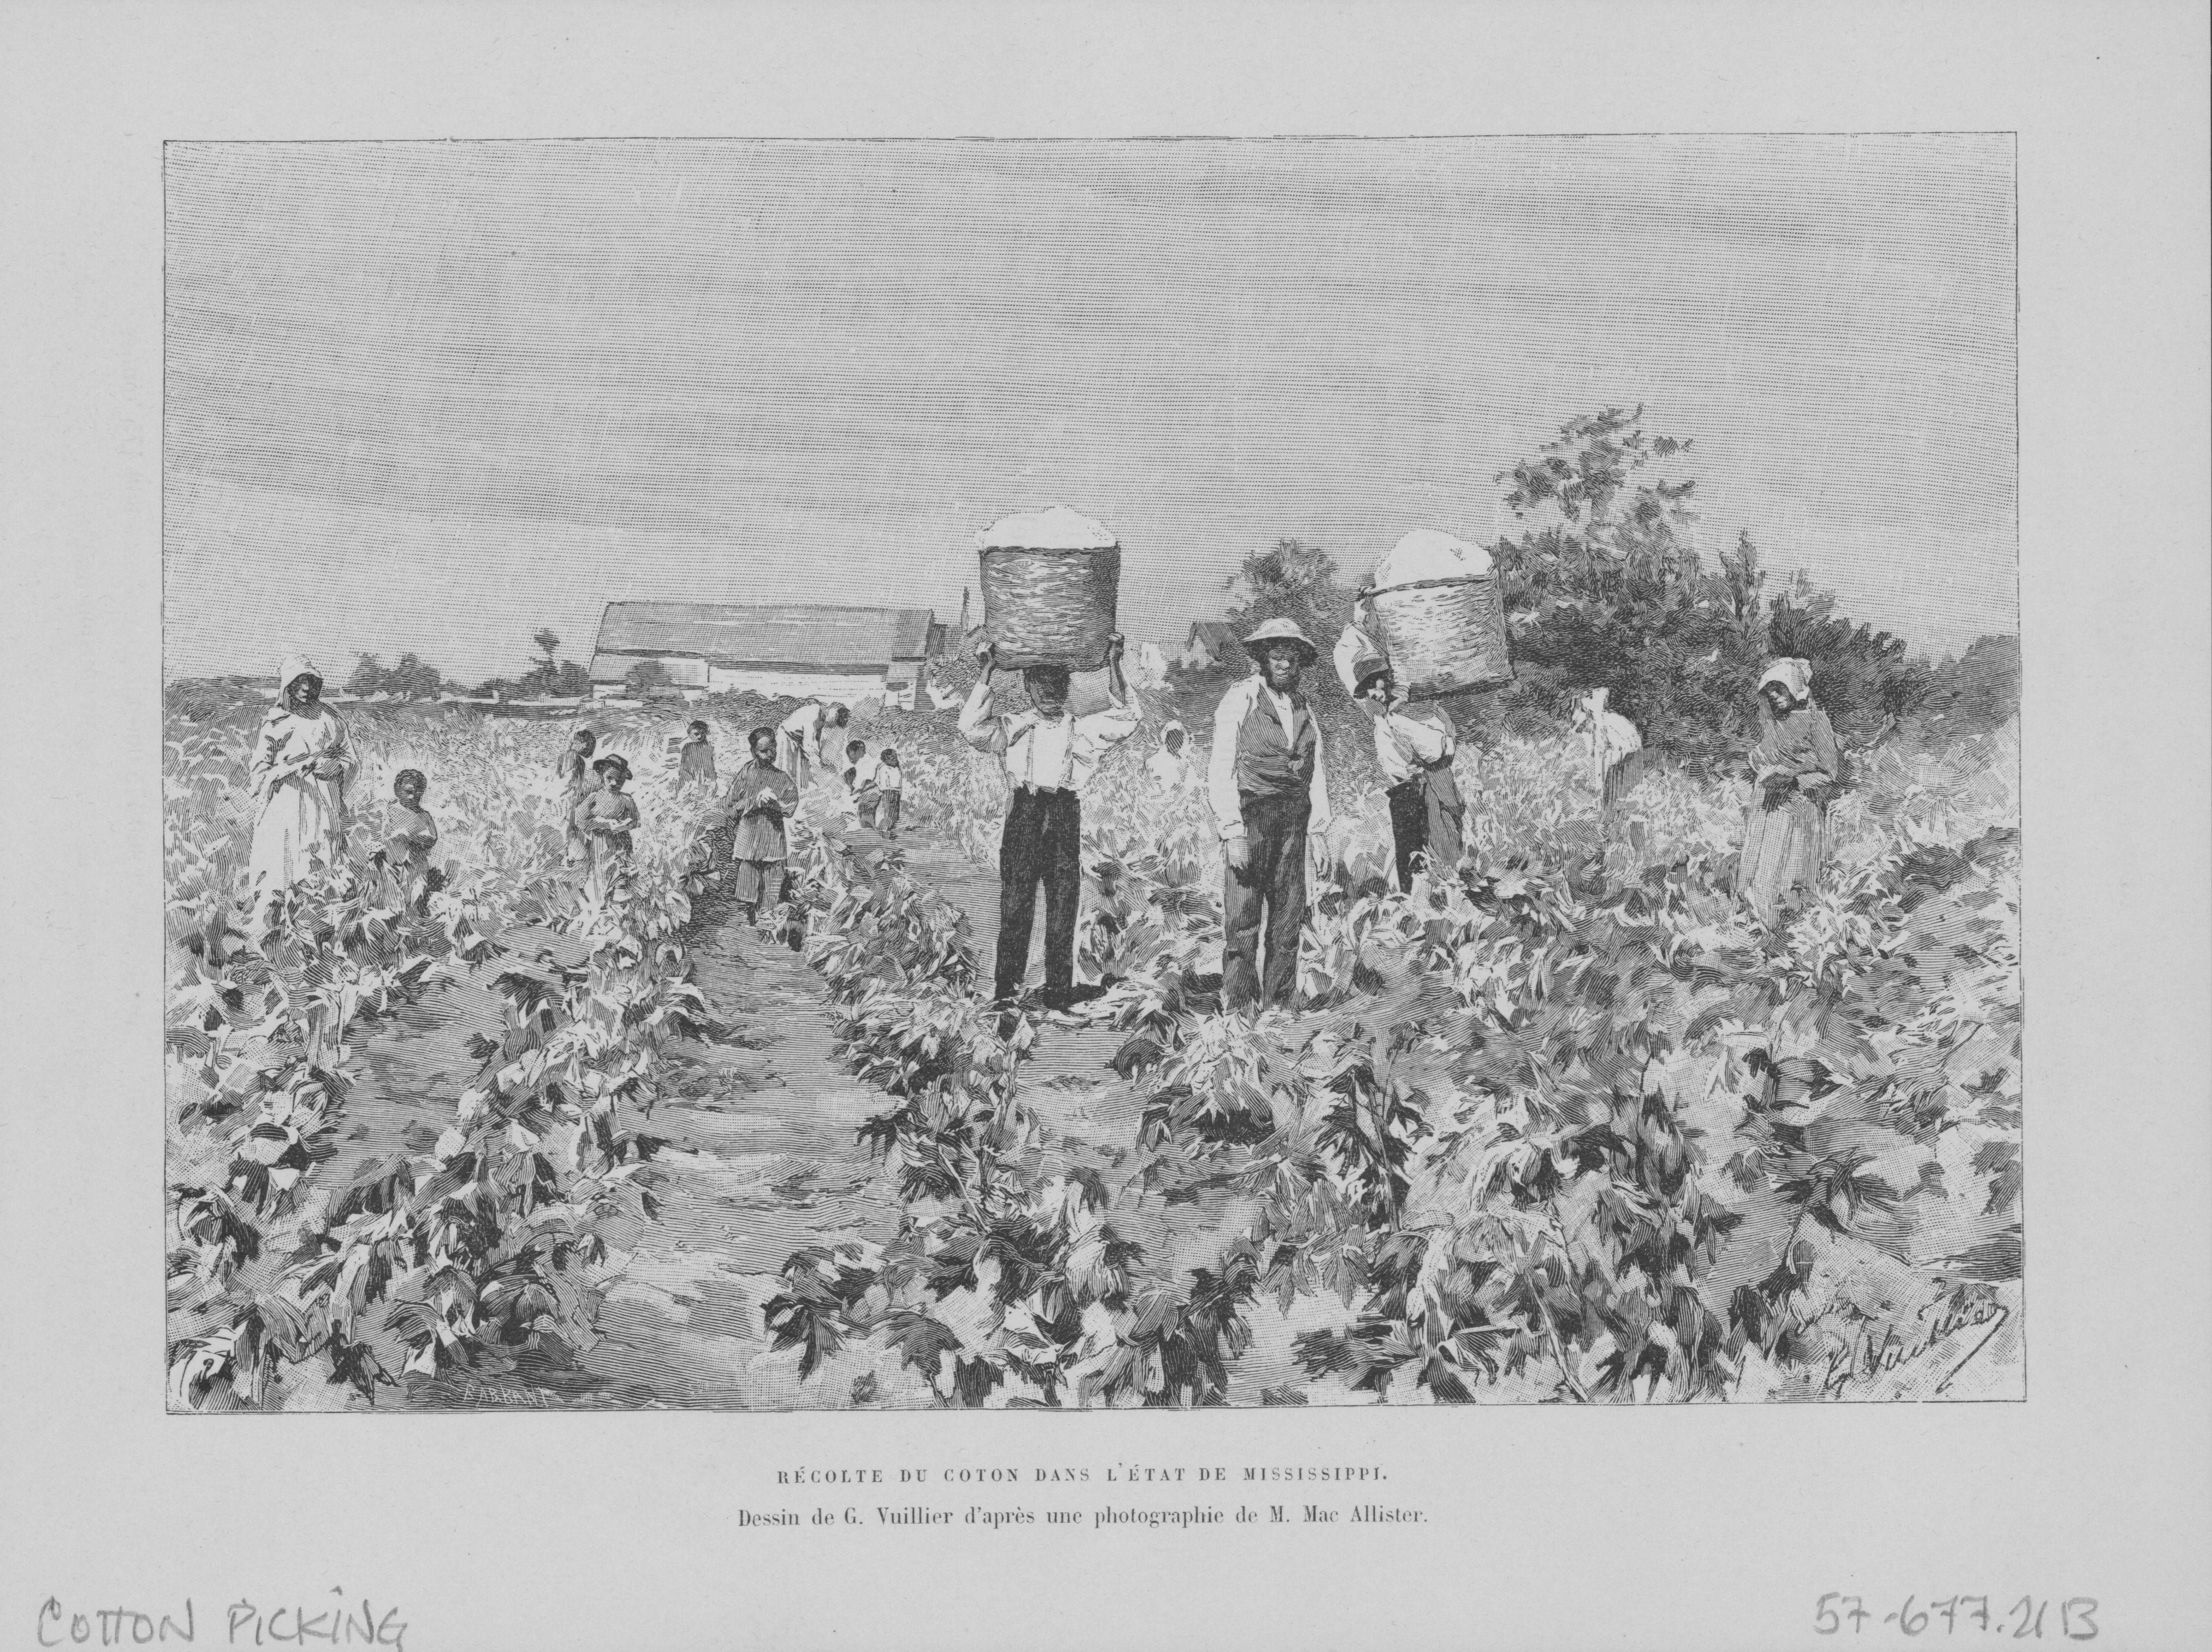 slavery in the late 1800s